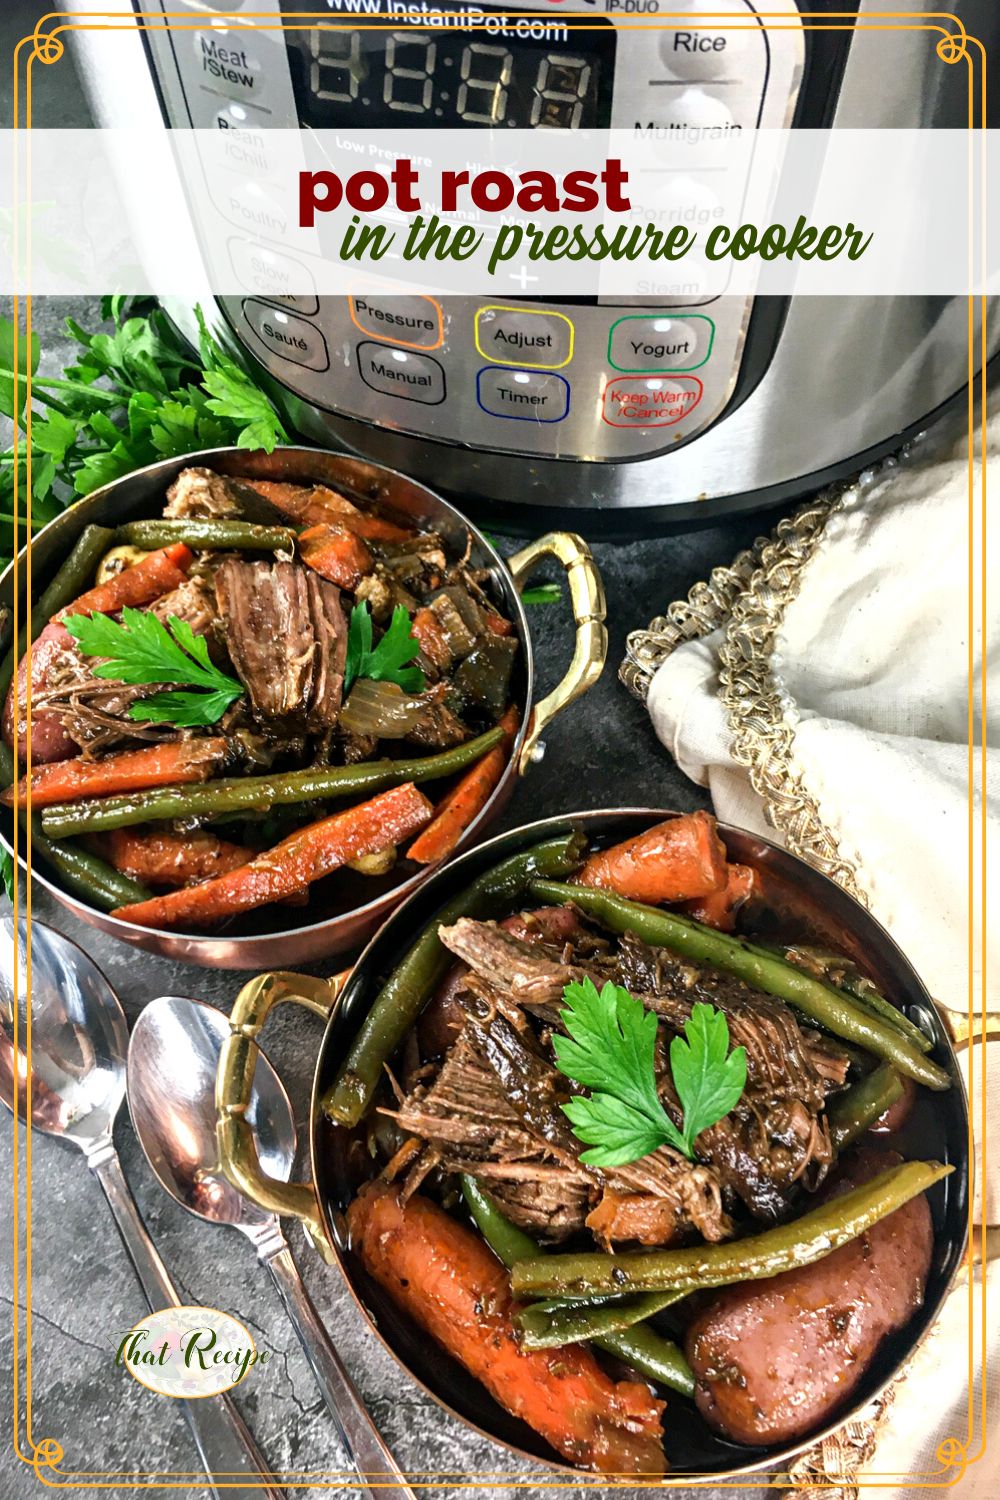 bowls of pot roast with text overlay "pot roast in the pressure cooker"